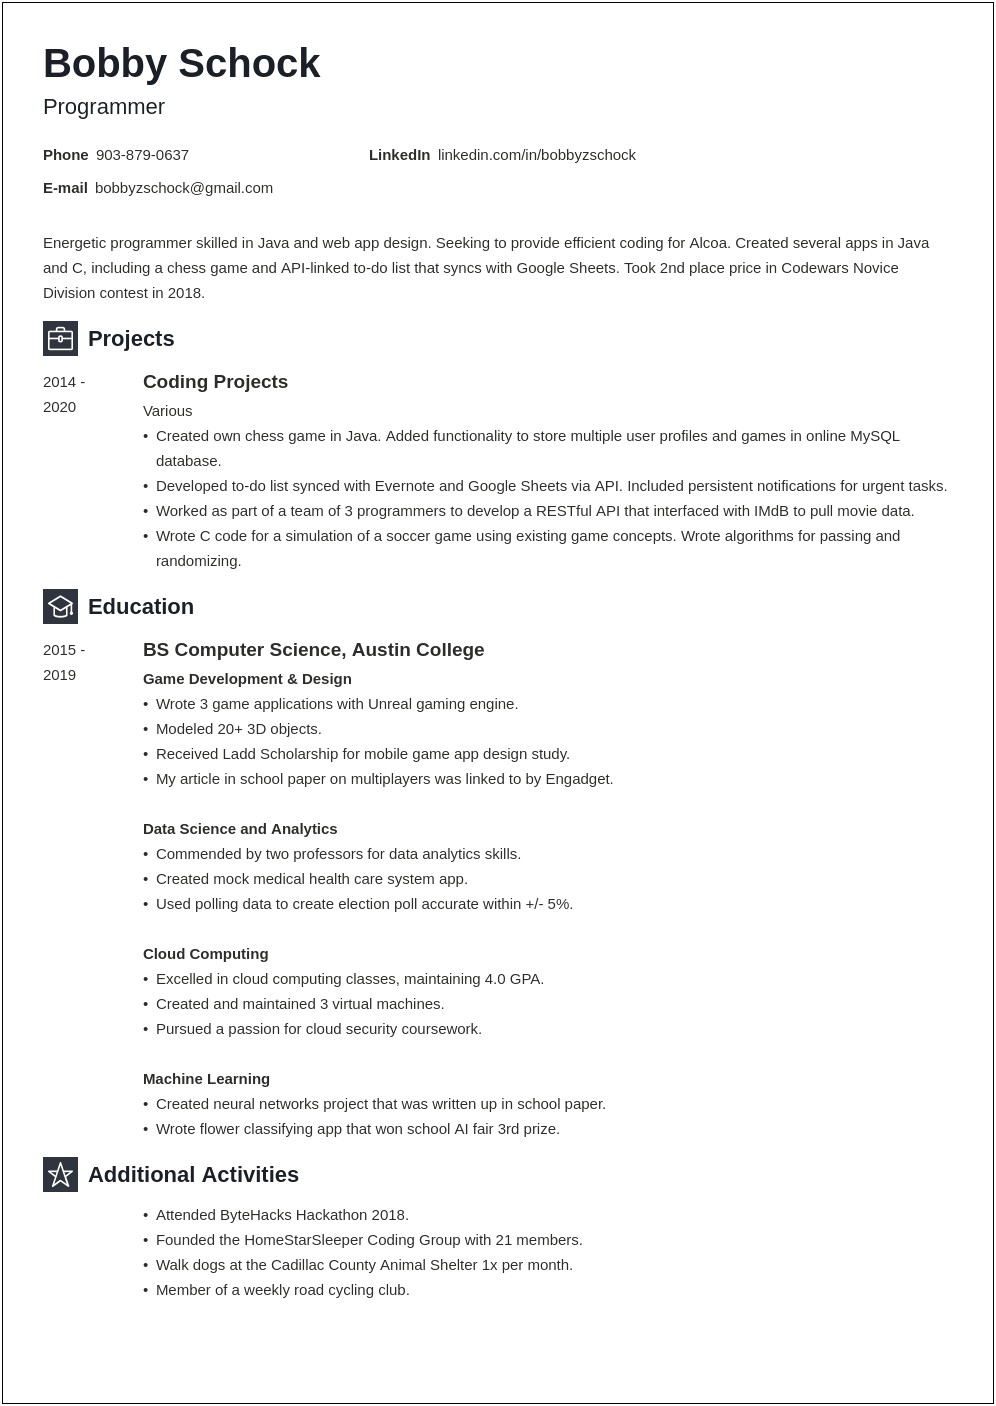 Professional Resume For Not Much Job Experience